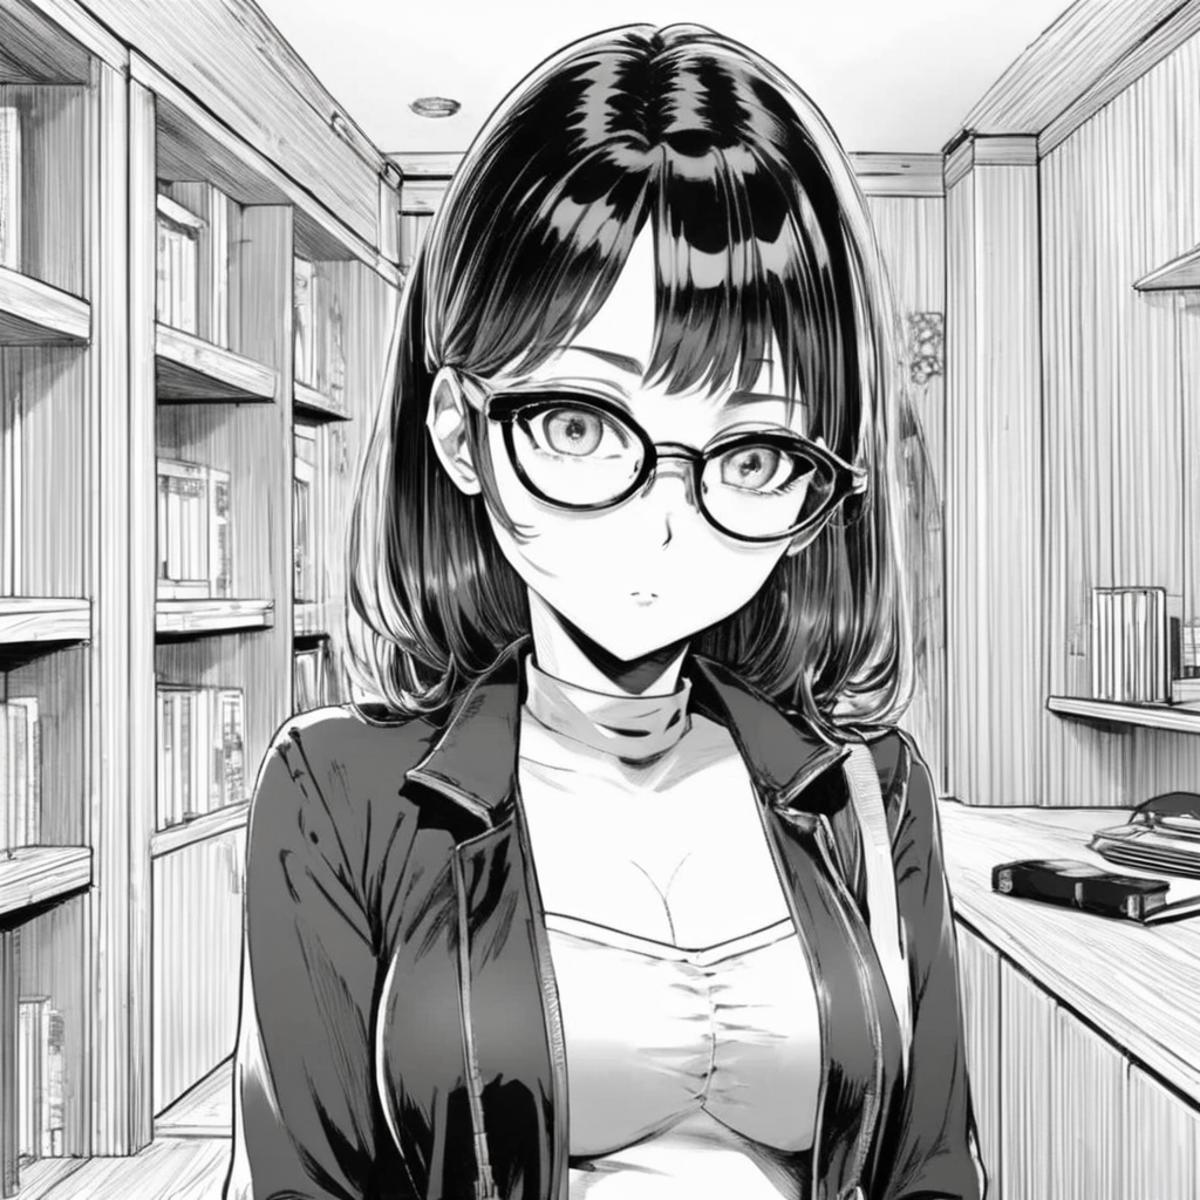 LineAniRedmond- Linear Manga Style for SD XL - Anime Style. image by artificialguybr